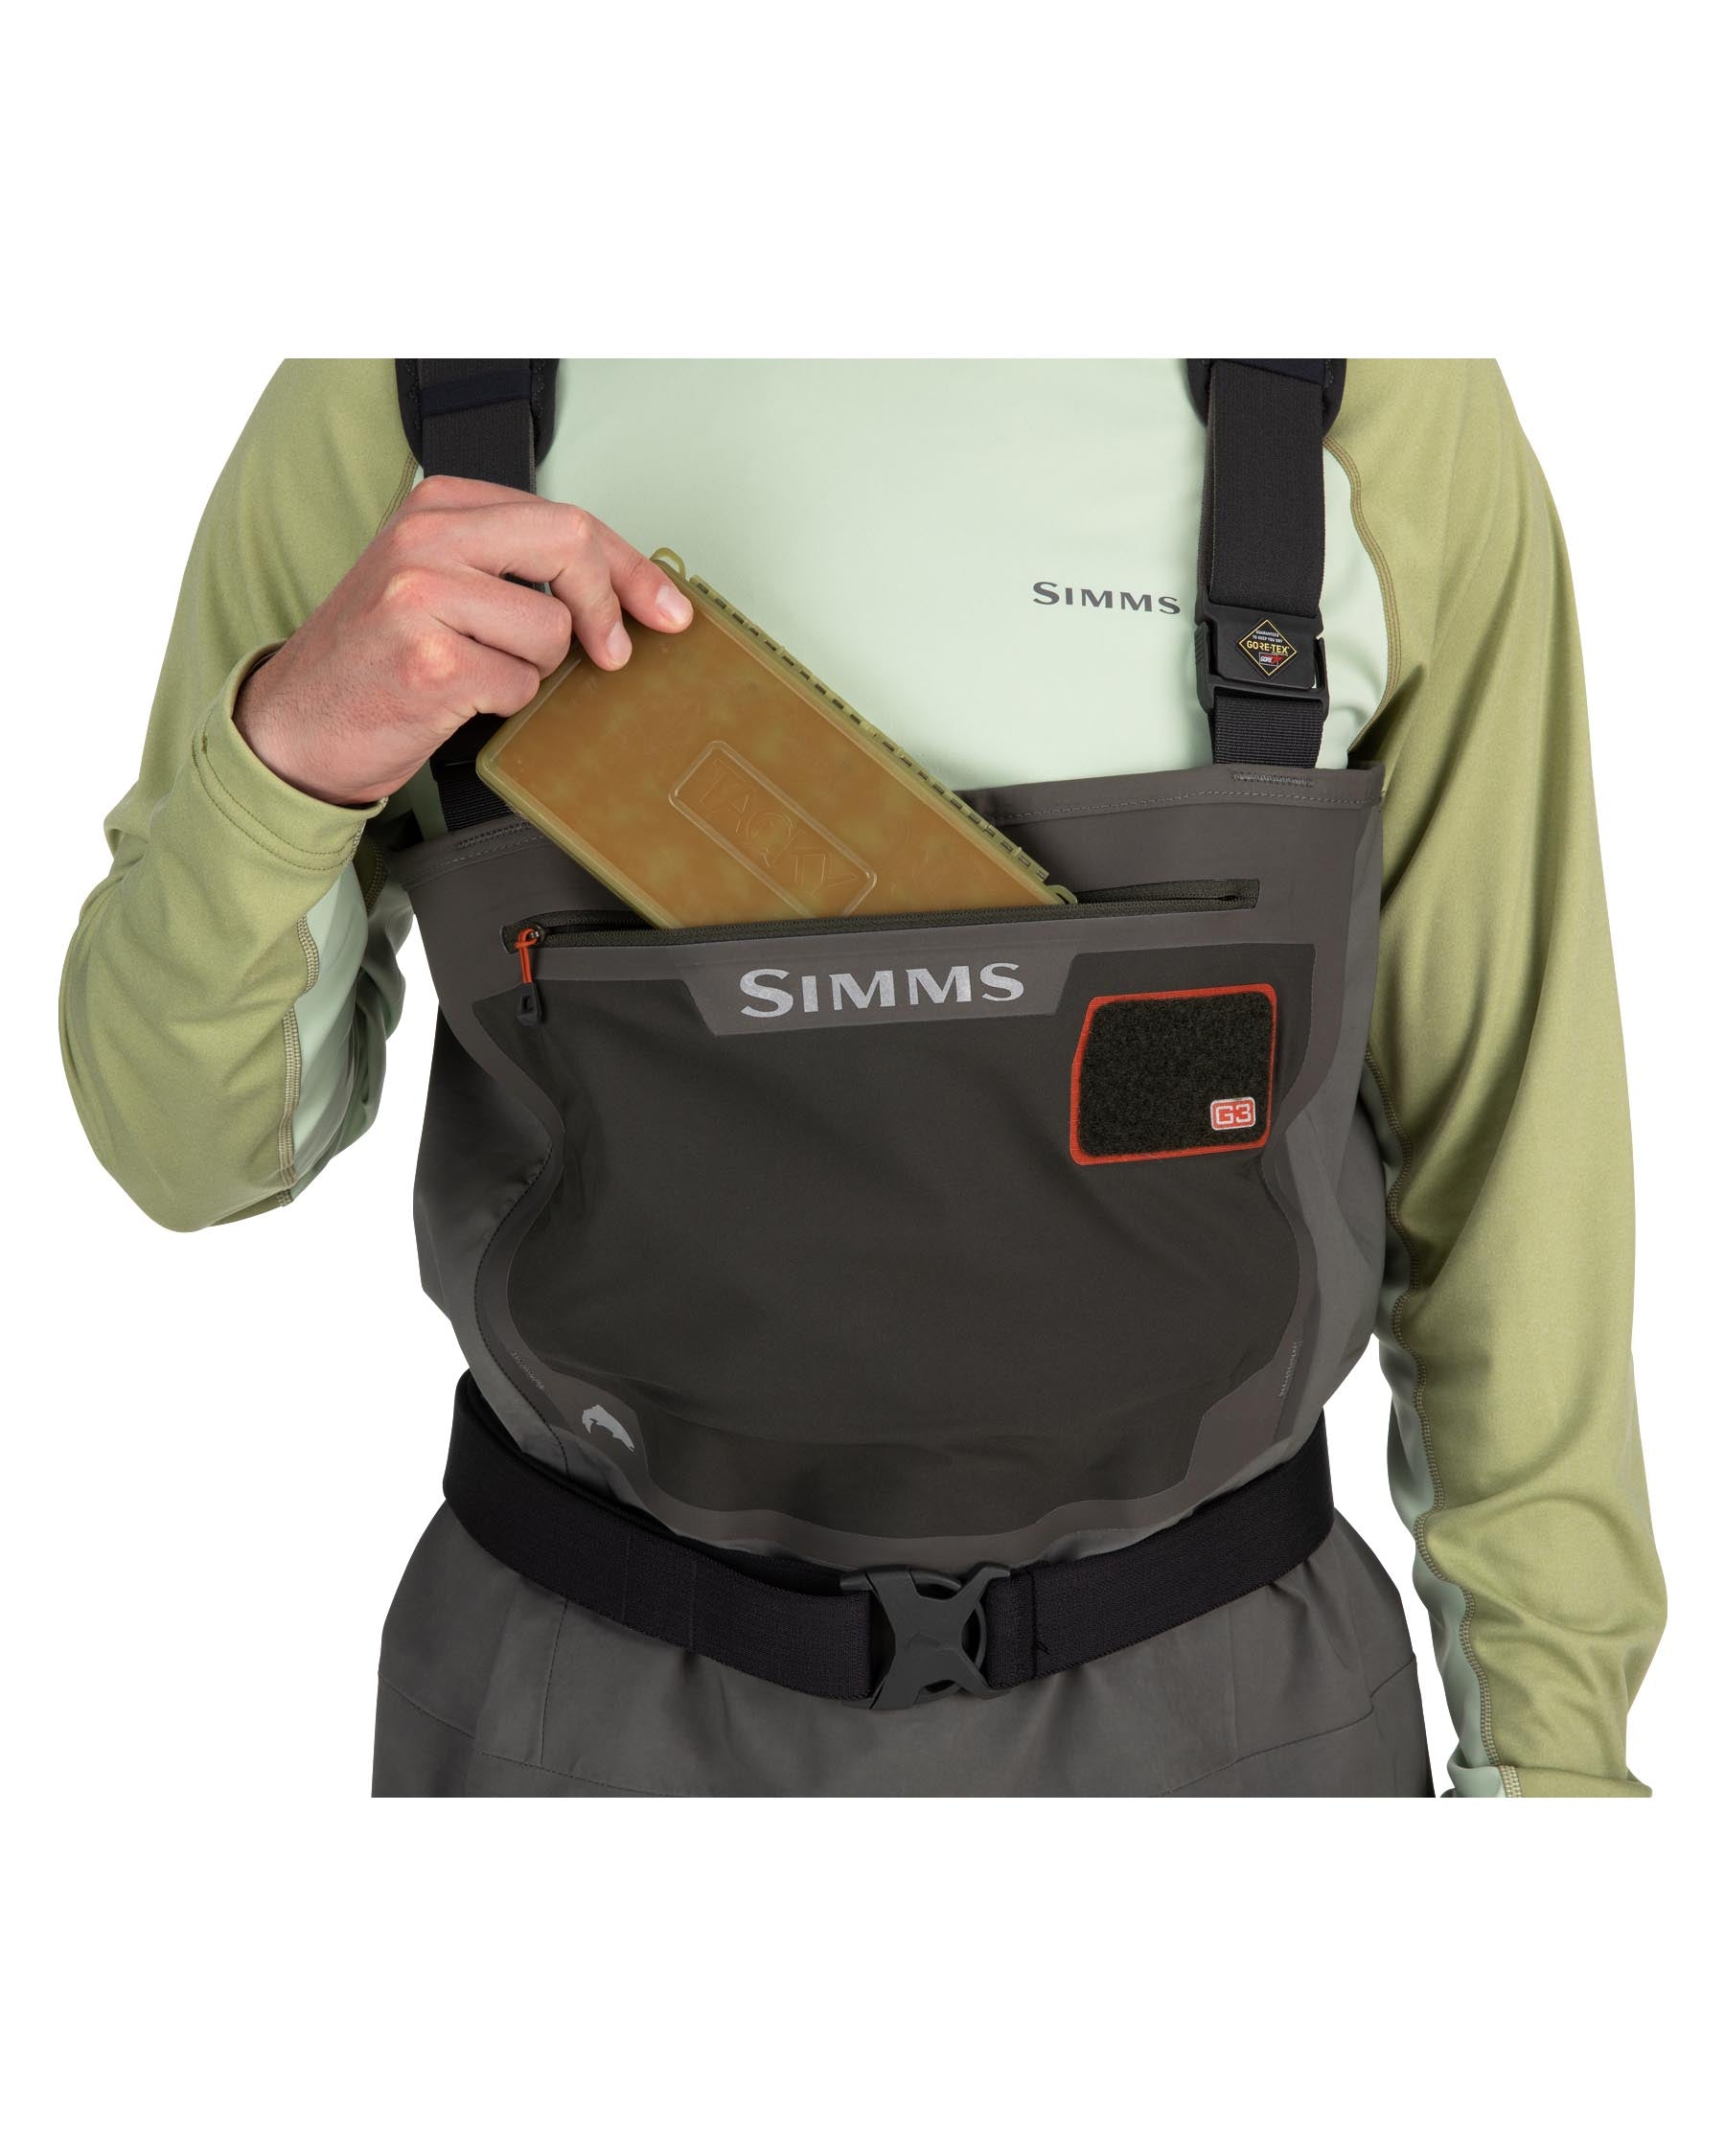 M's G3 Guide Waders - Stockingfoot | Simms Fishing Products